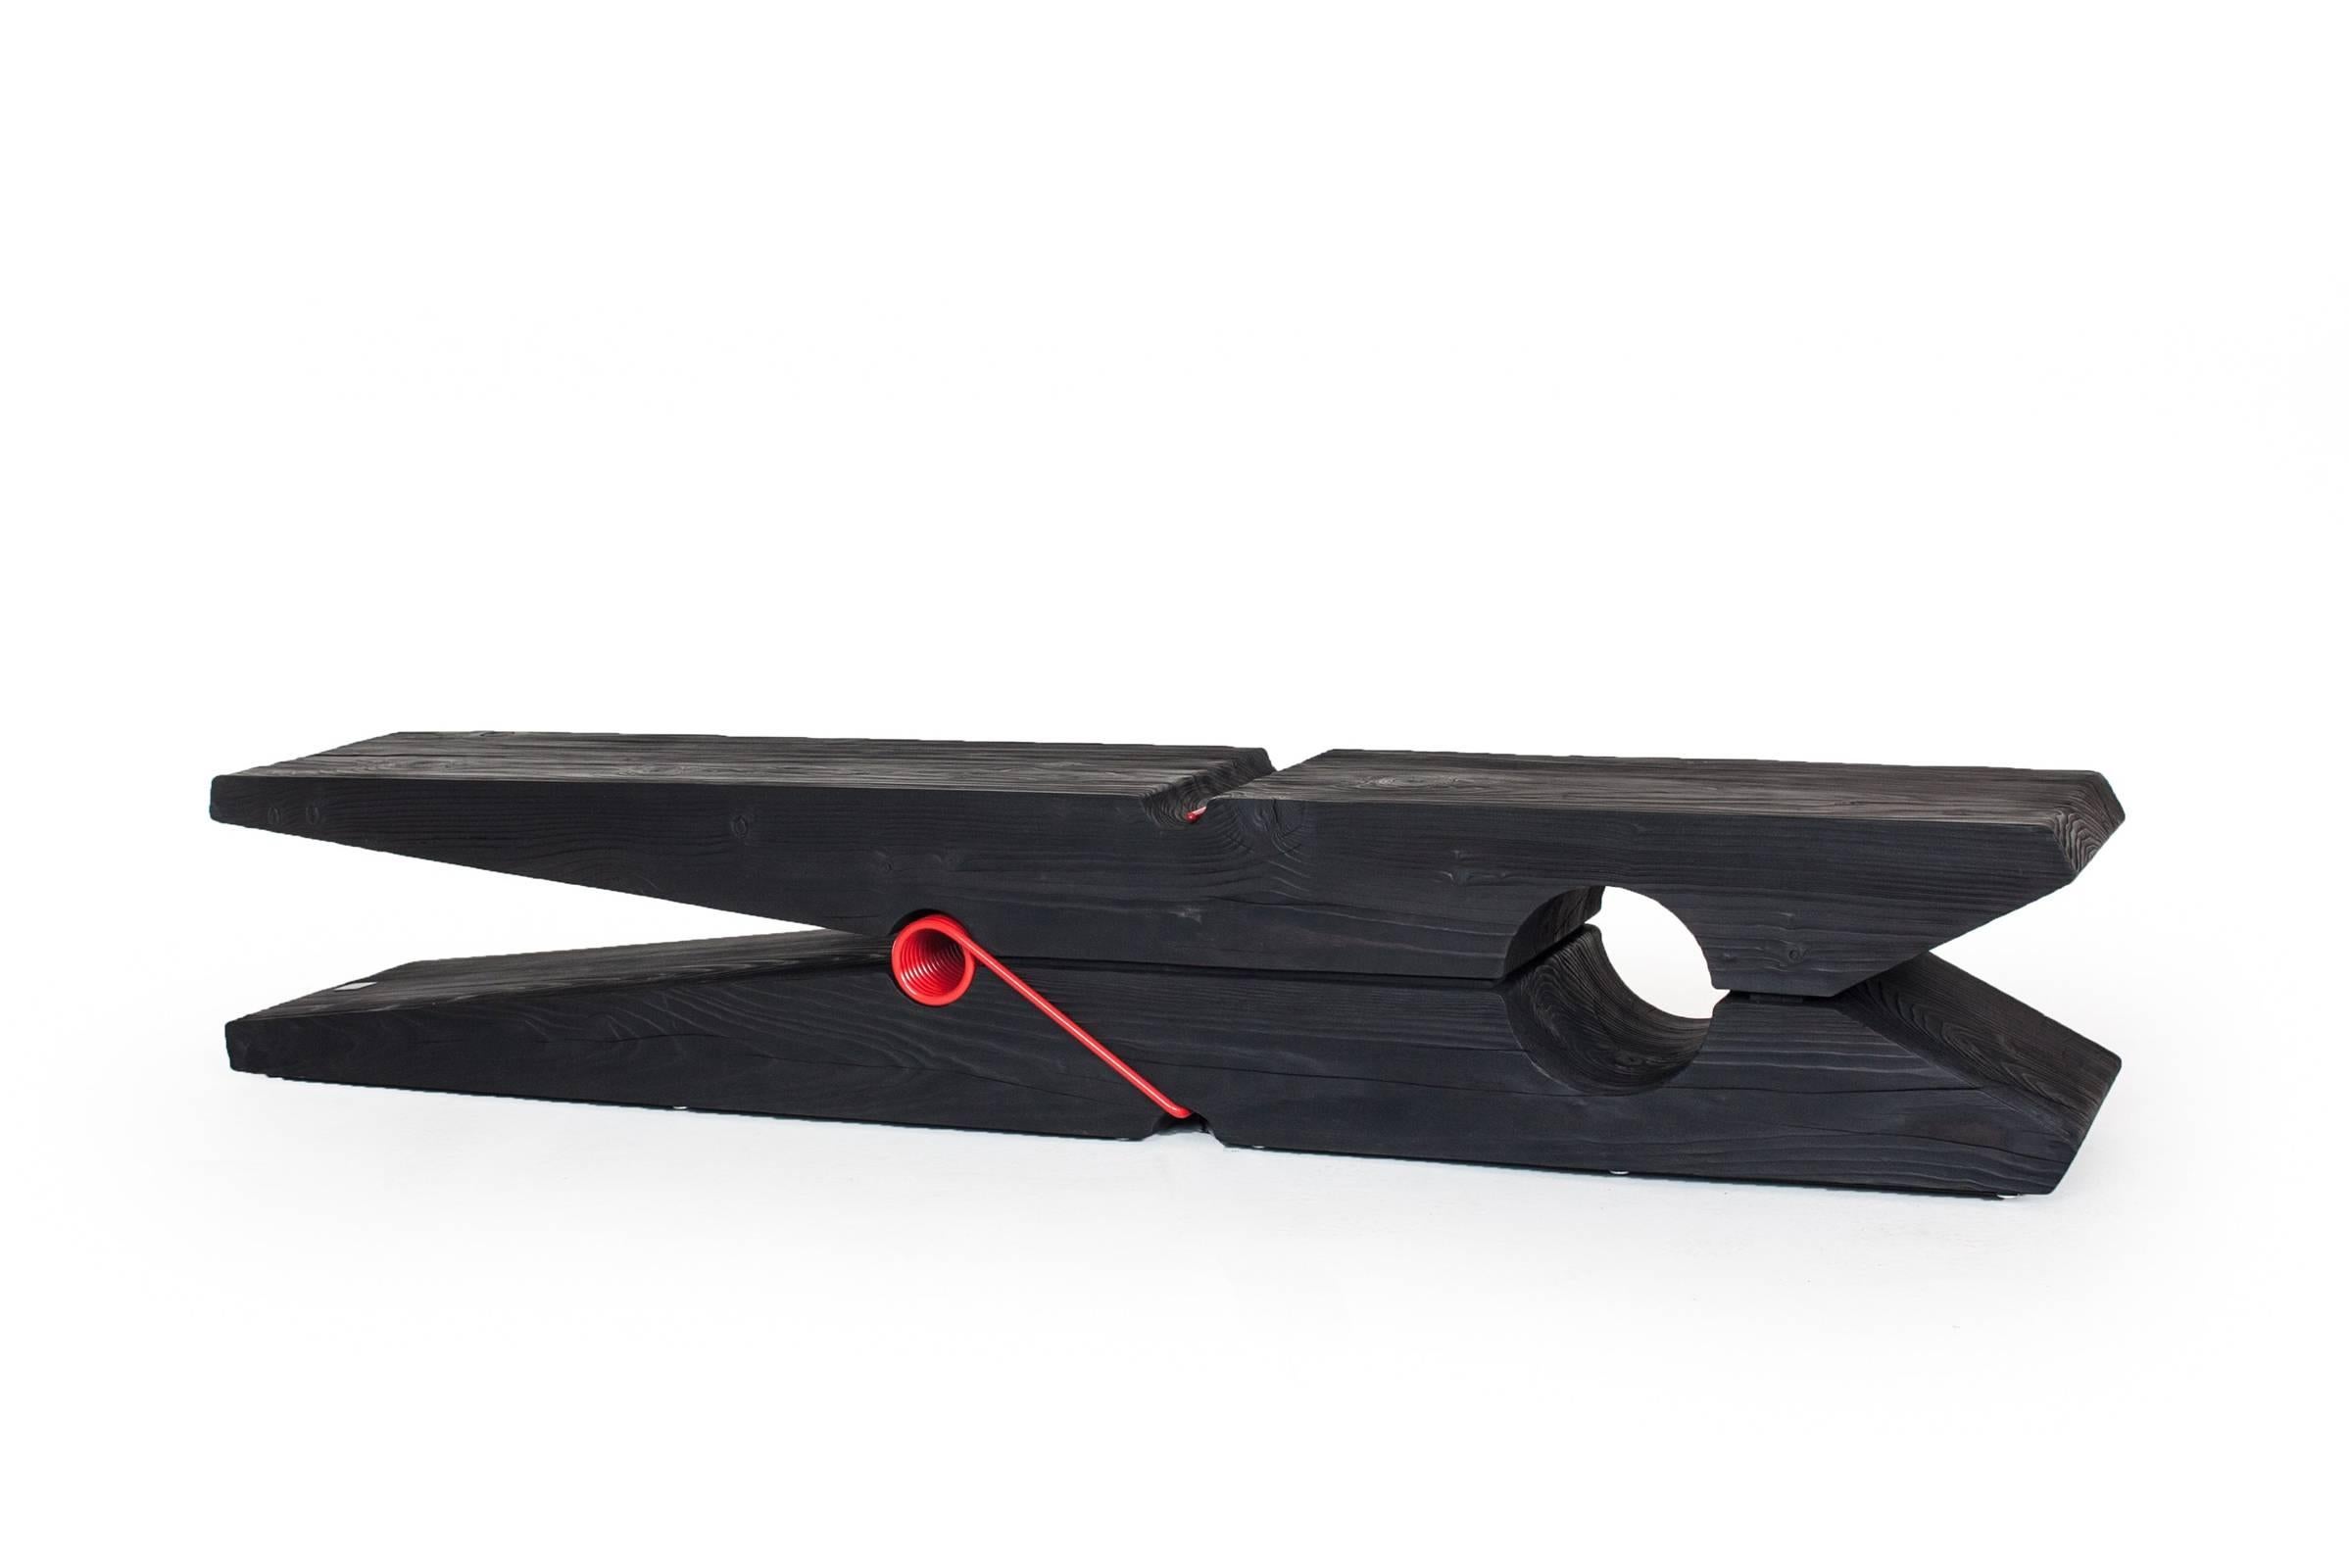 Bench Clothespin in solid natural black burnt cedar wood,
with red metal mechanism. Treated solid wood 
with wax with natural pine extracts.
L239,4xD45xH43cm, price: 10900,00€
L190xD45xH42cm, price: 9400,00€
L140xD39xH40cm, price: 8300,00€.
Solid